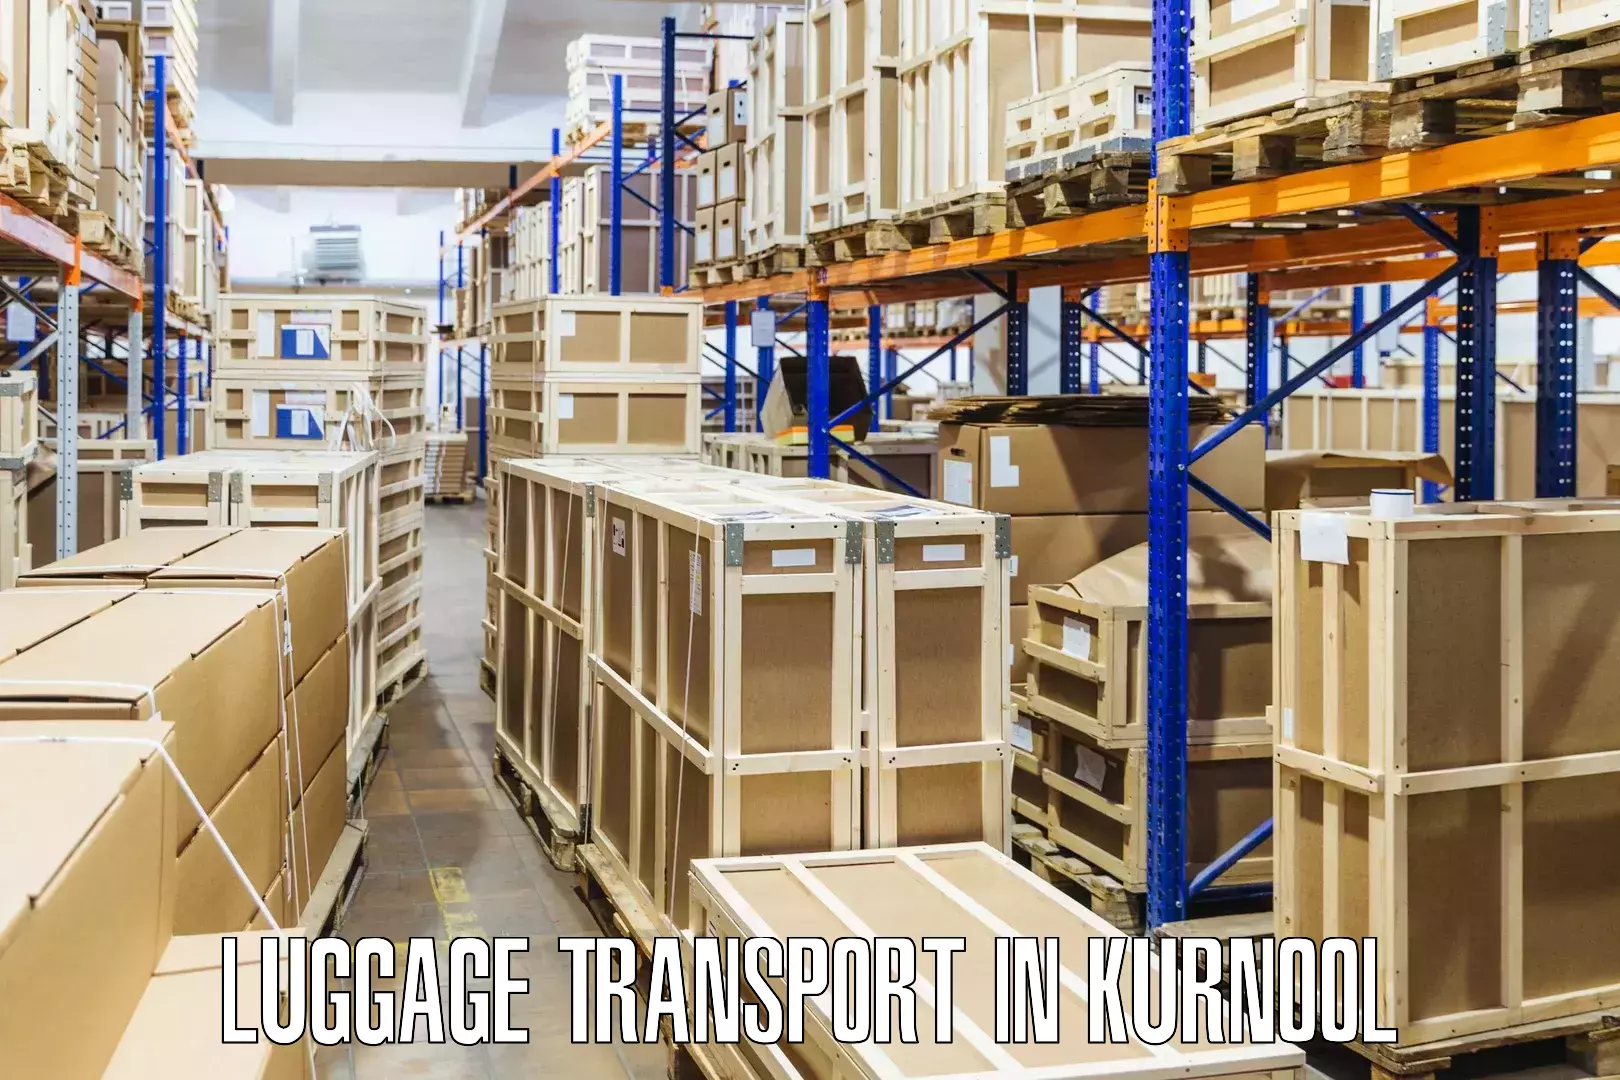 Instant baggage transport quote in Kurnool